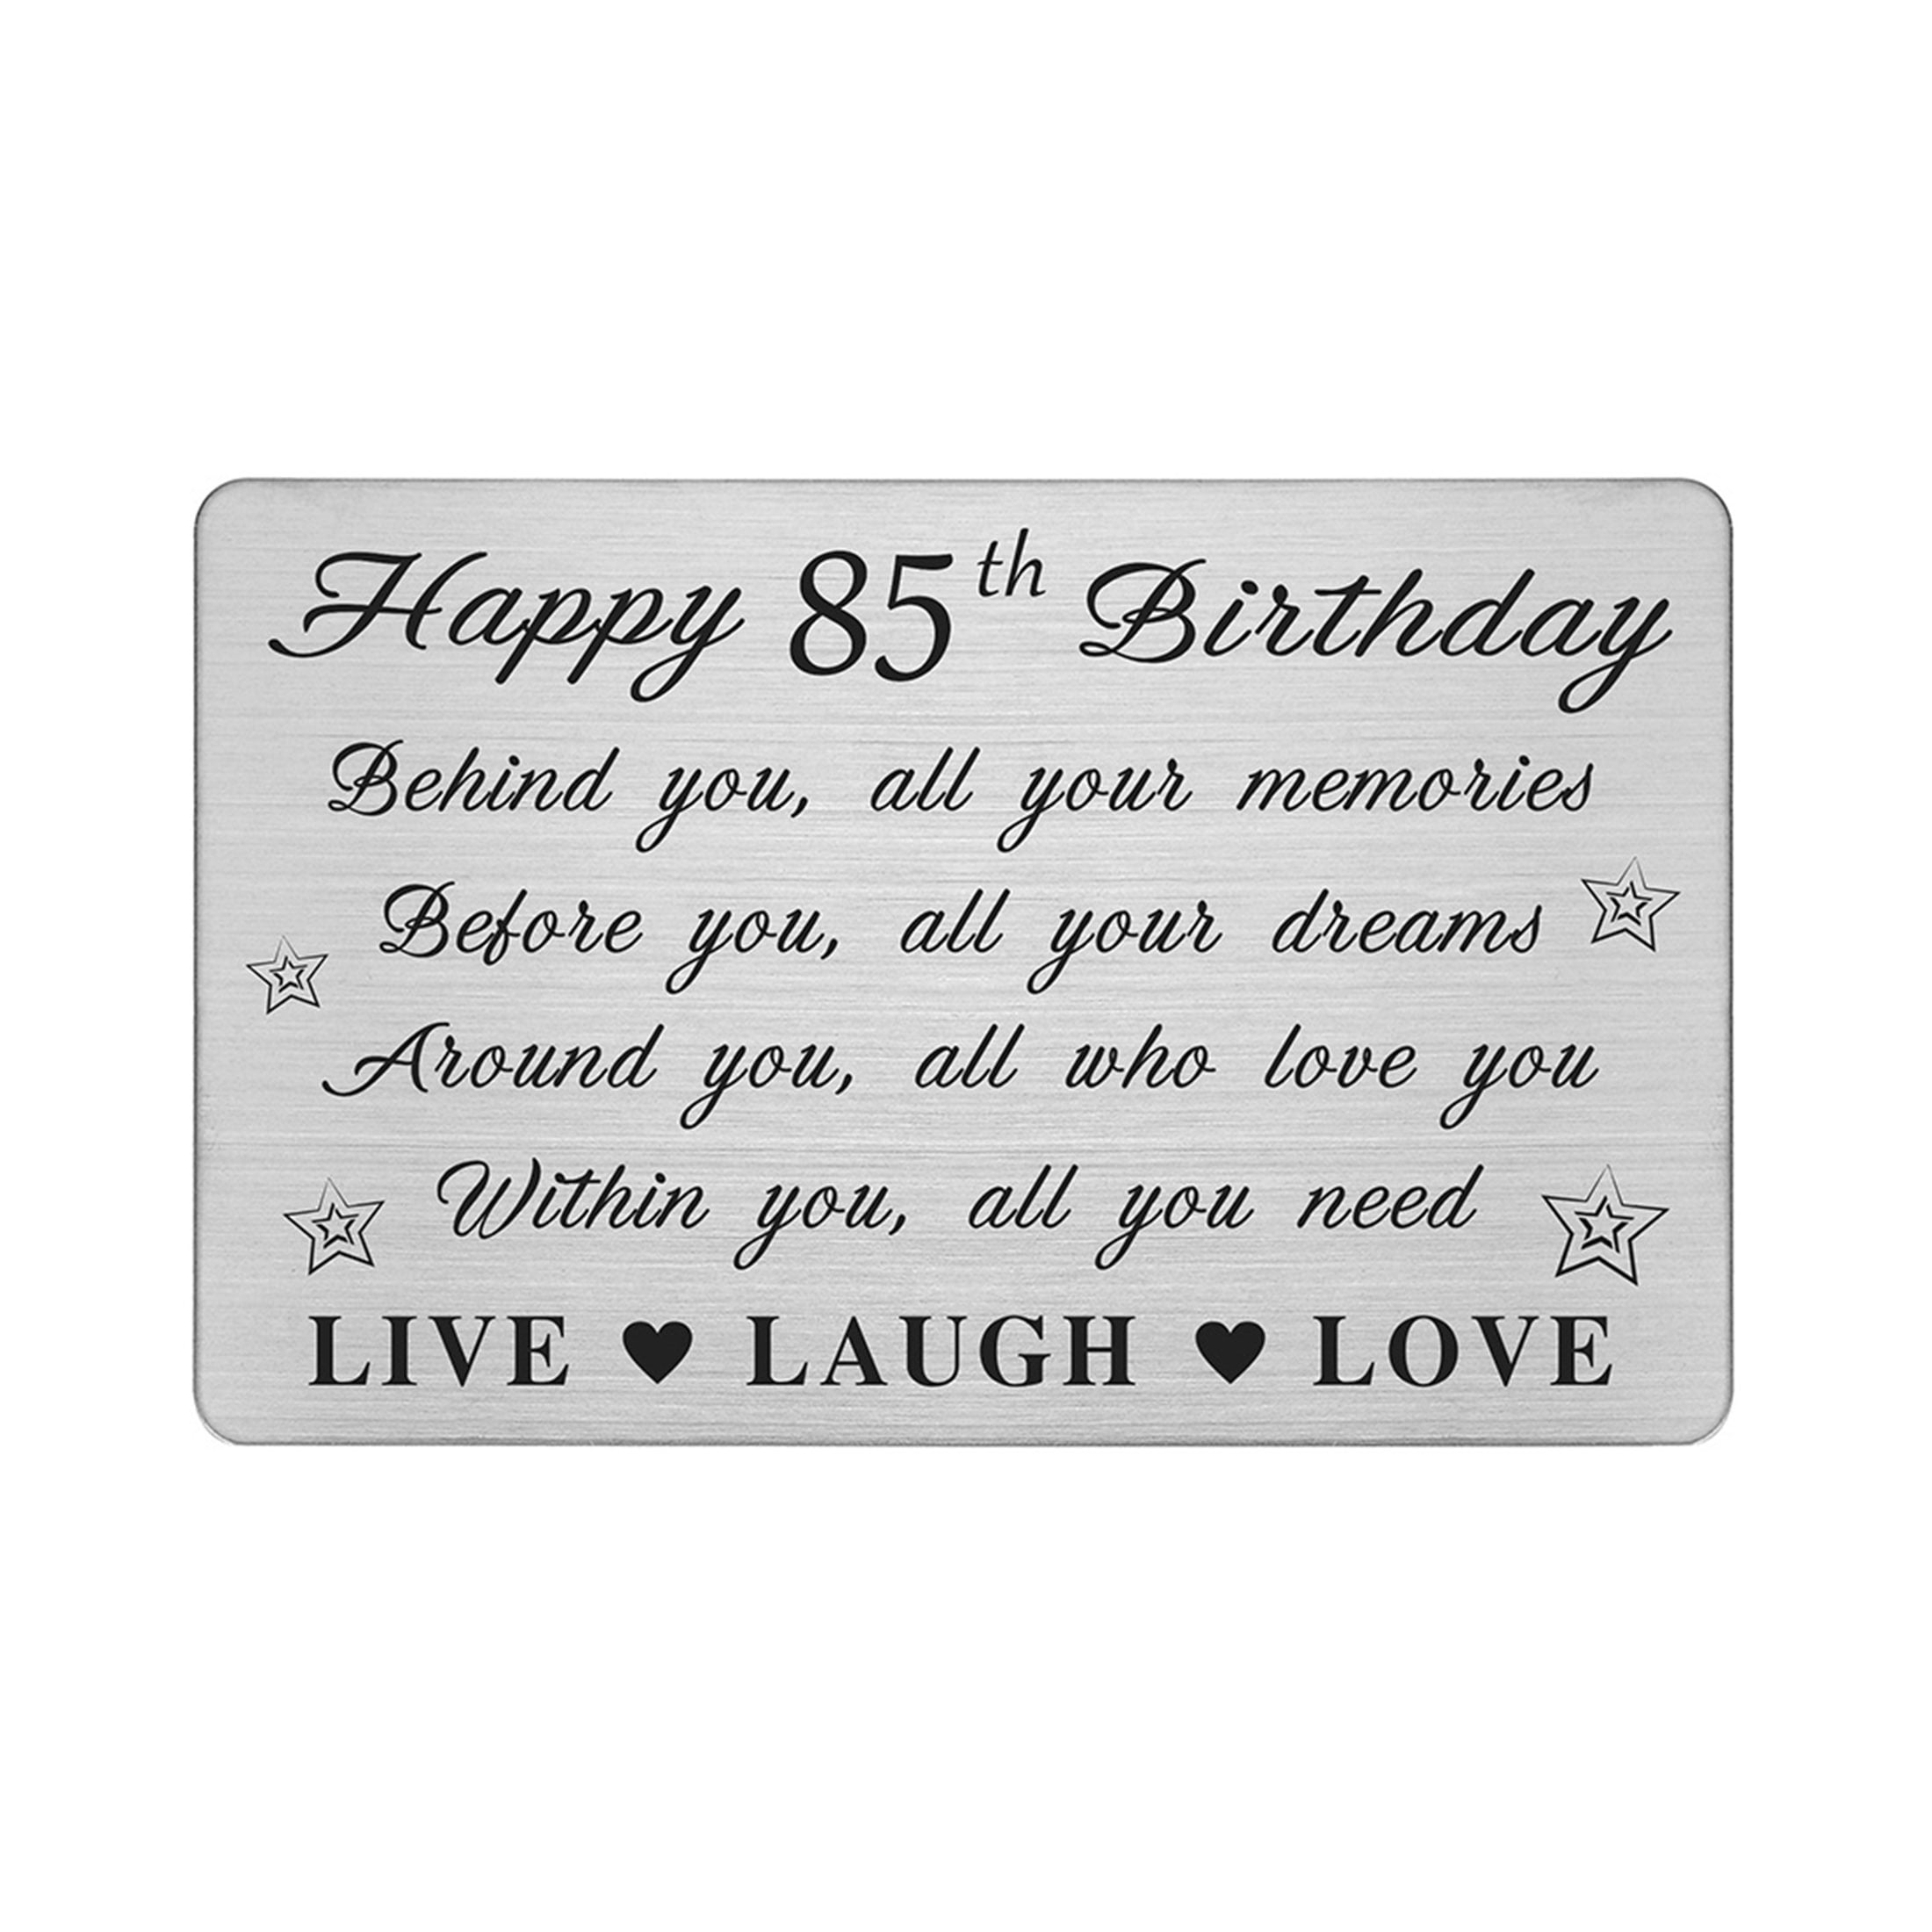 DEGASKEN Happy 85th Birthday Card - Behind You All Your Memories - 85 ...